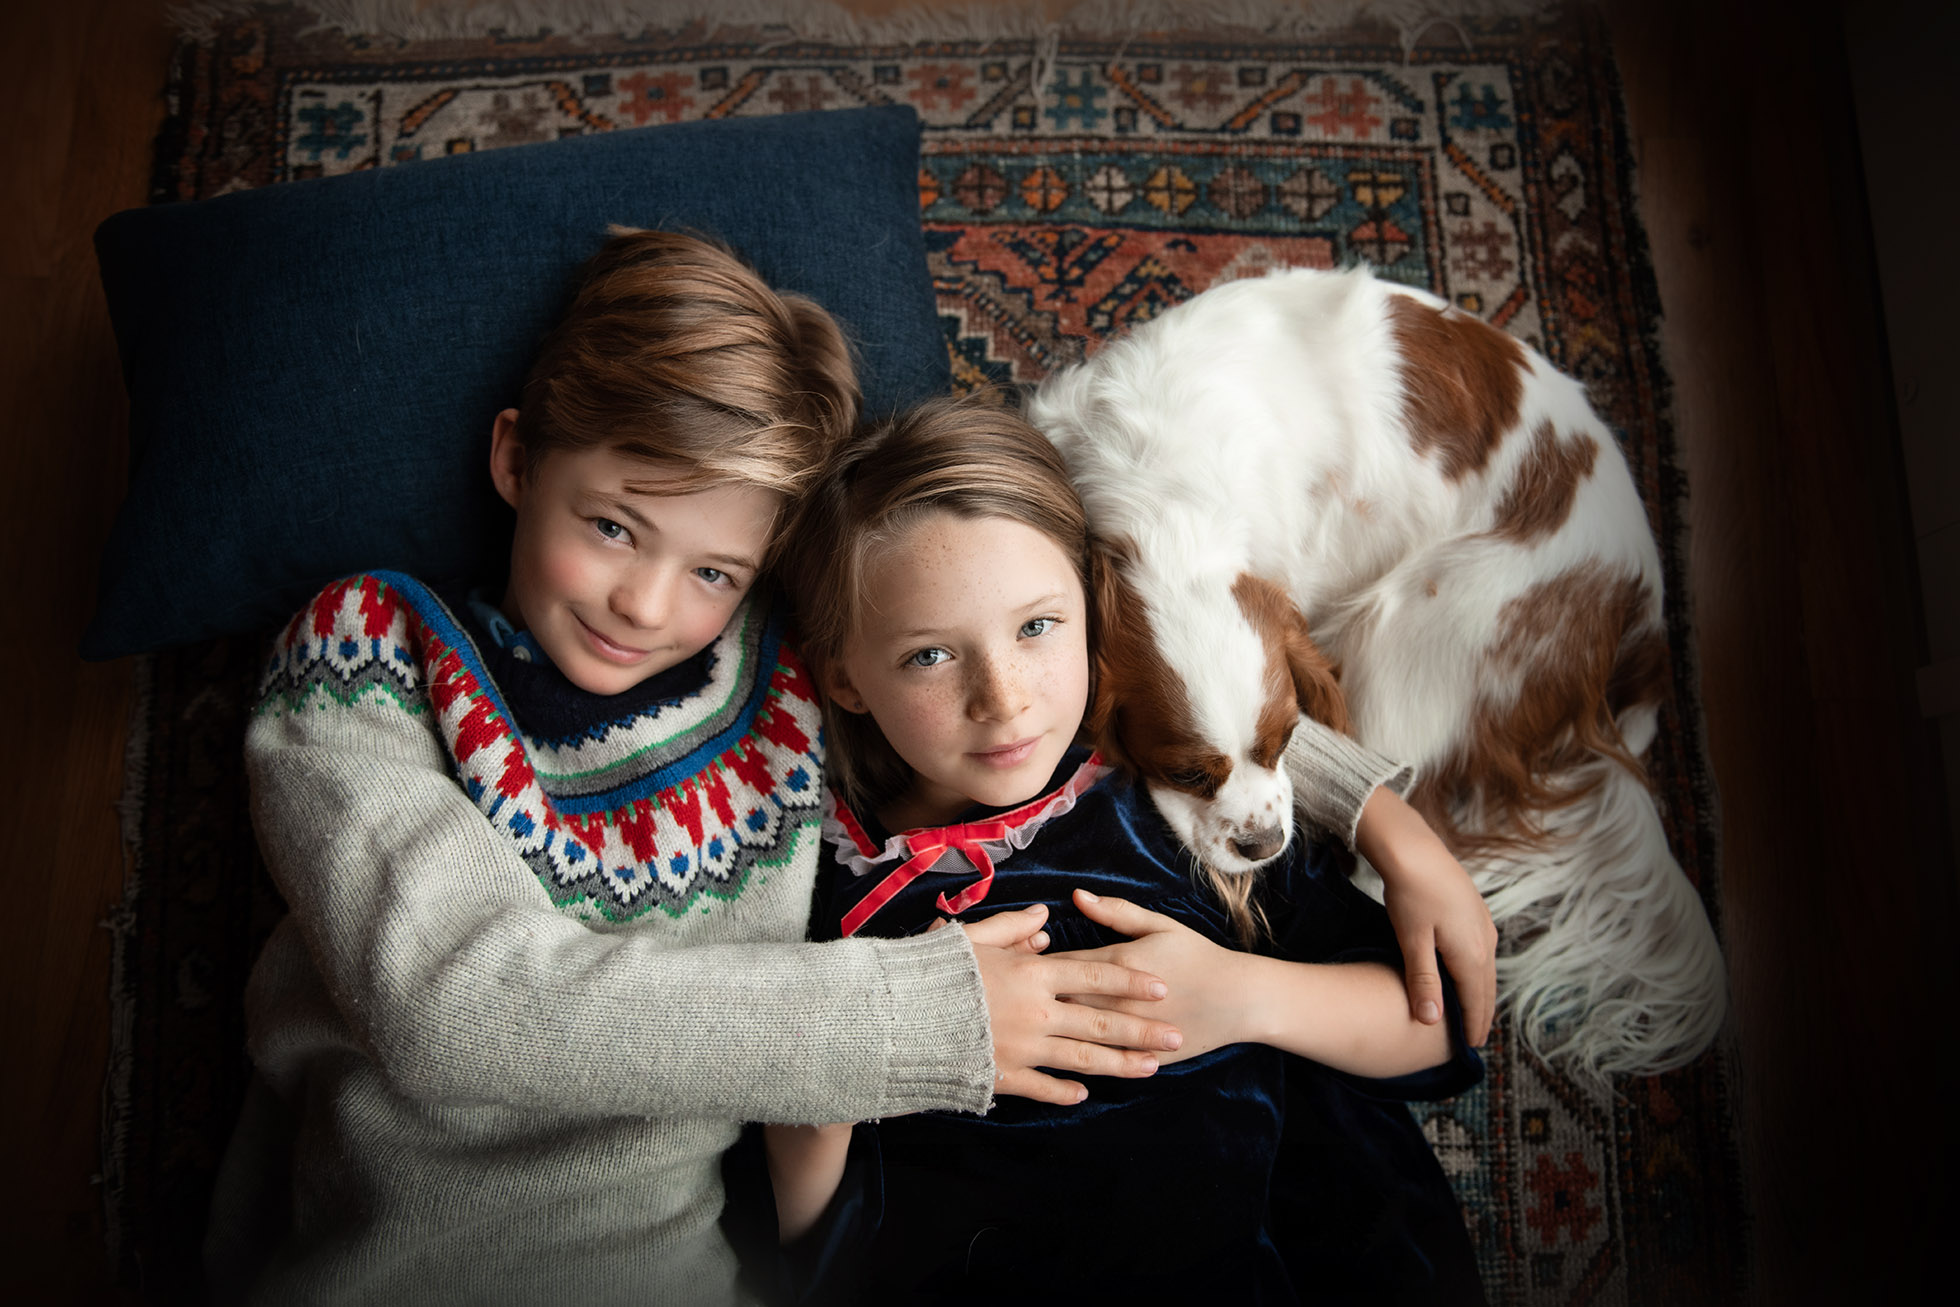 brother and sister hugging on the floor with a cavalier puppy asleep next to them - boulder photographer in home photography